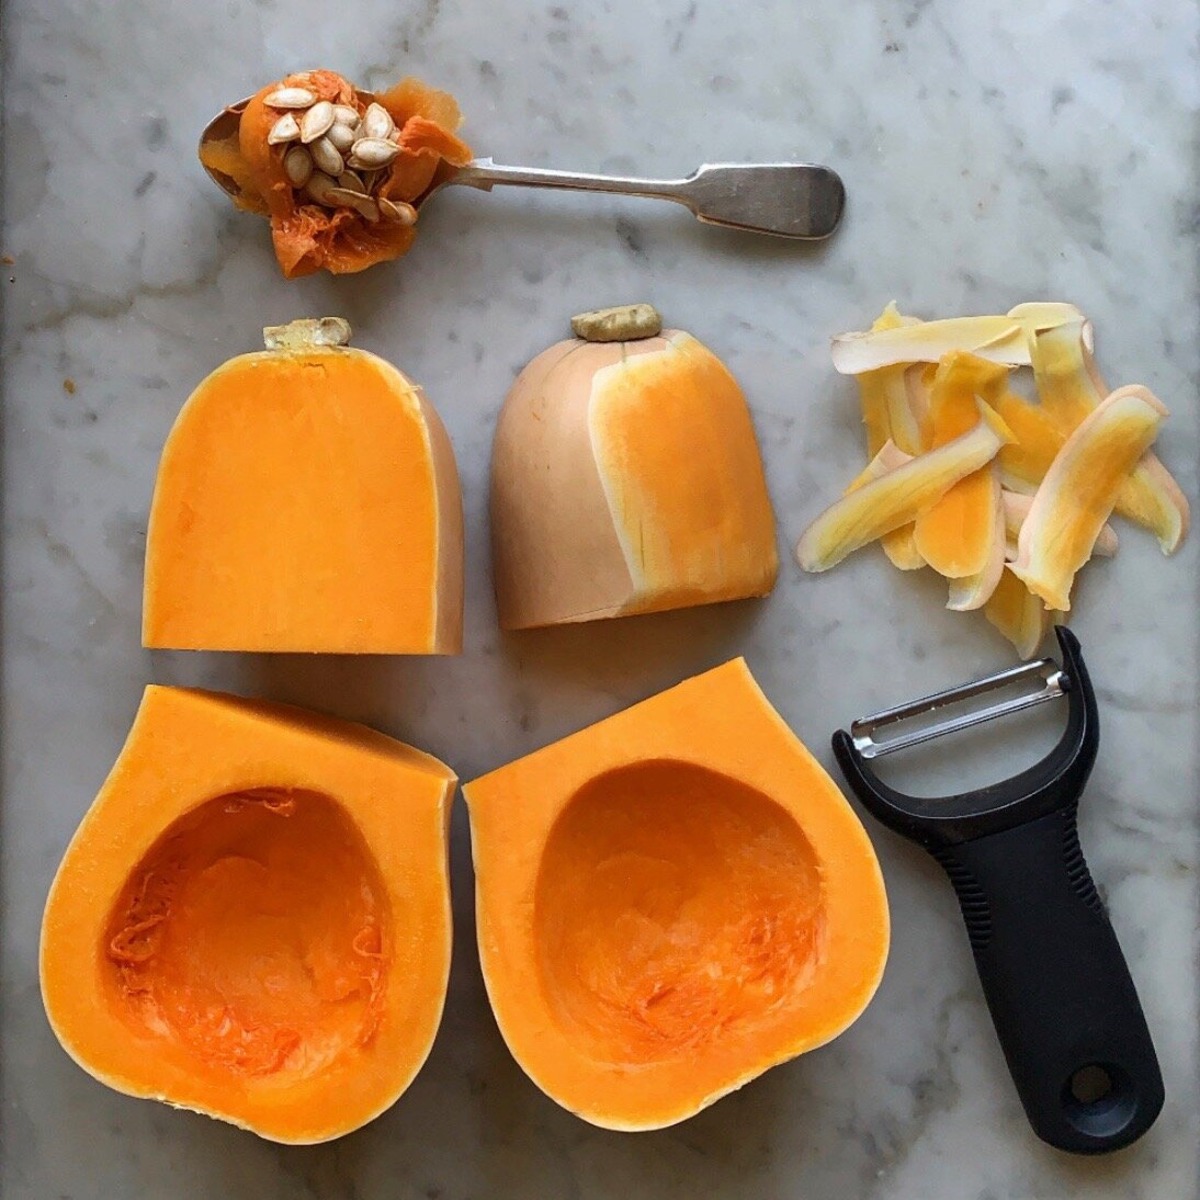 How To Store Squash After Cutting